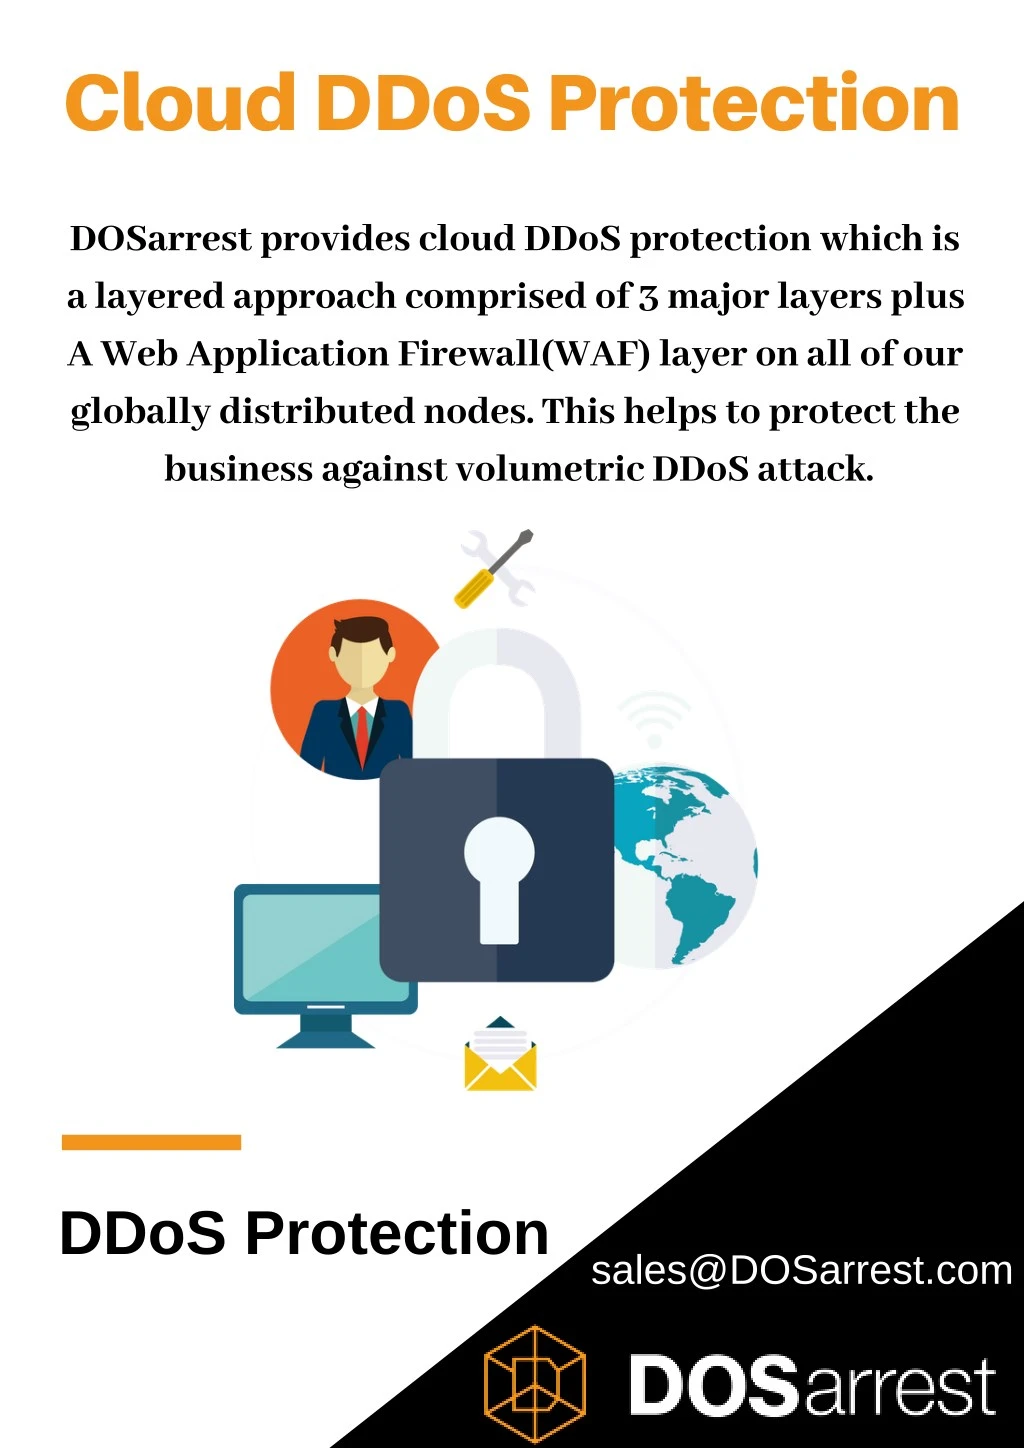 cloud ddos protection